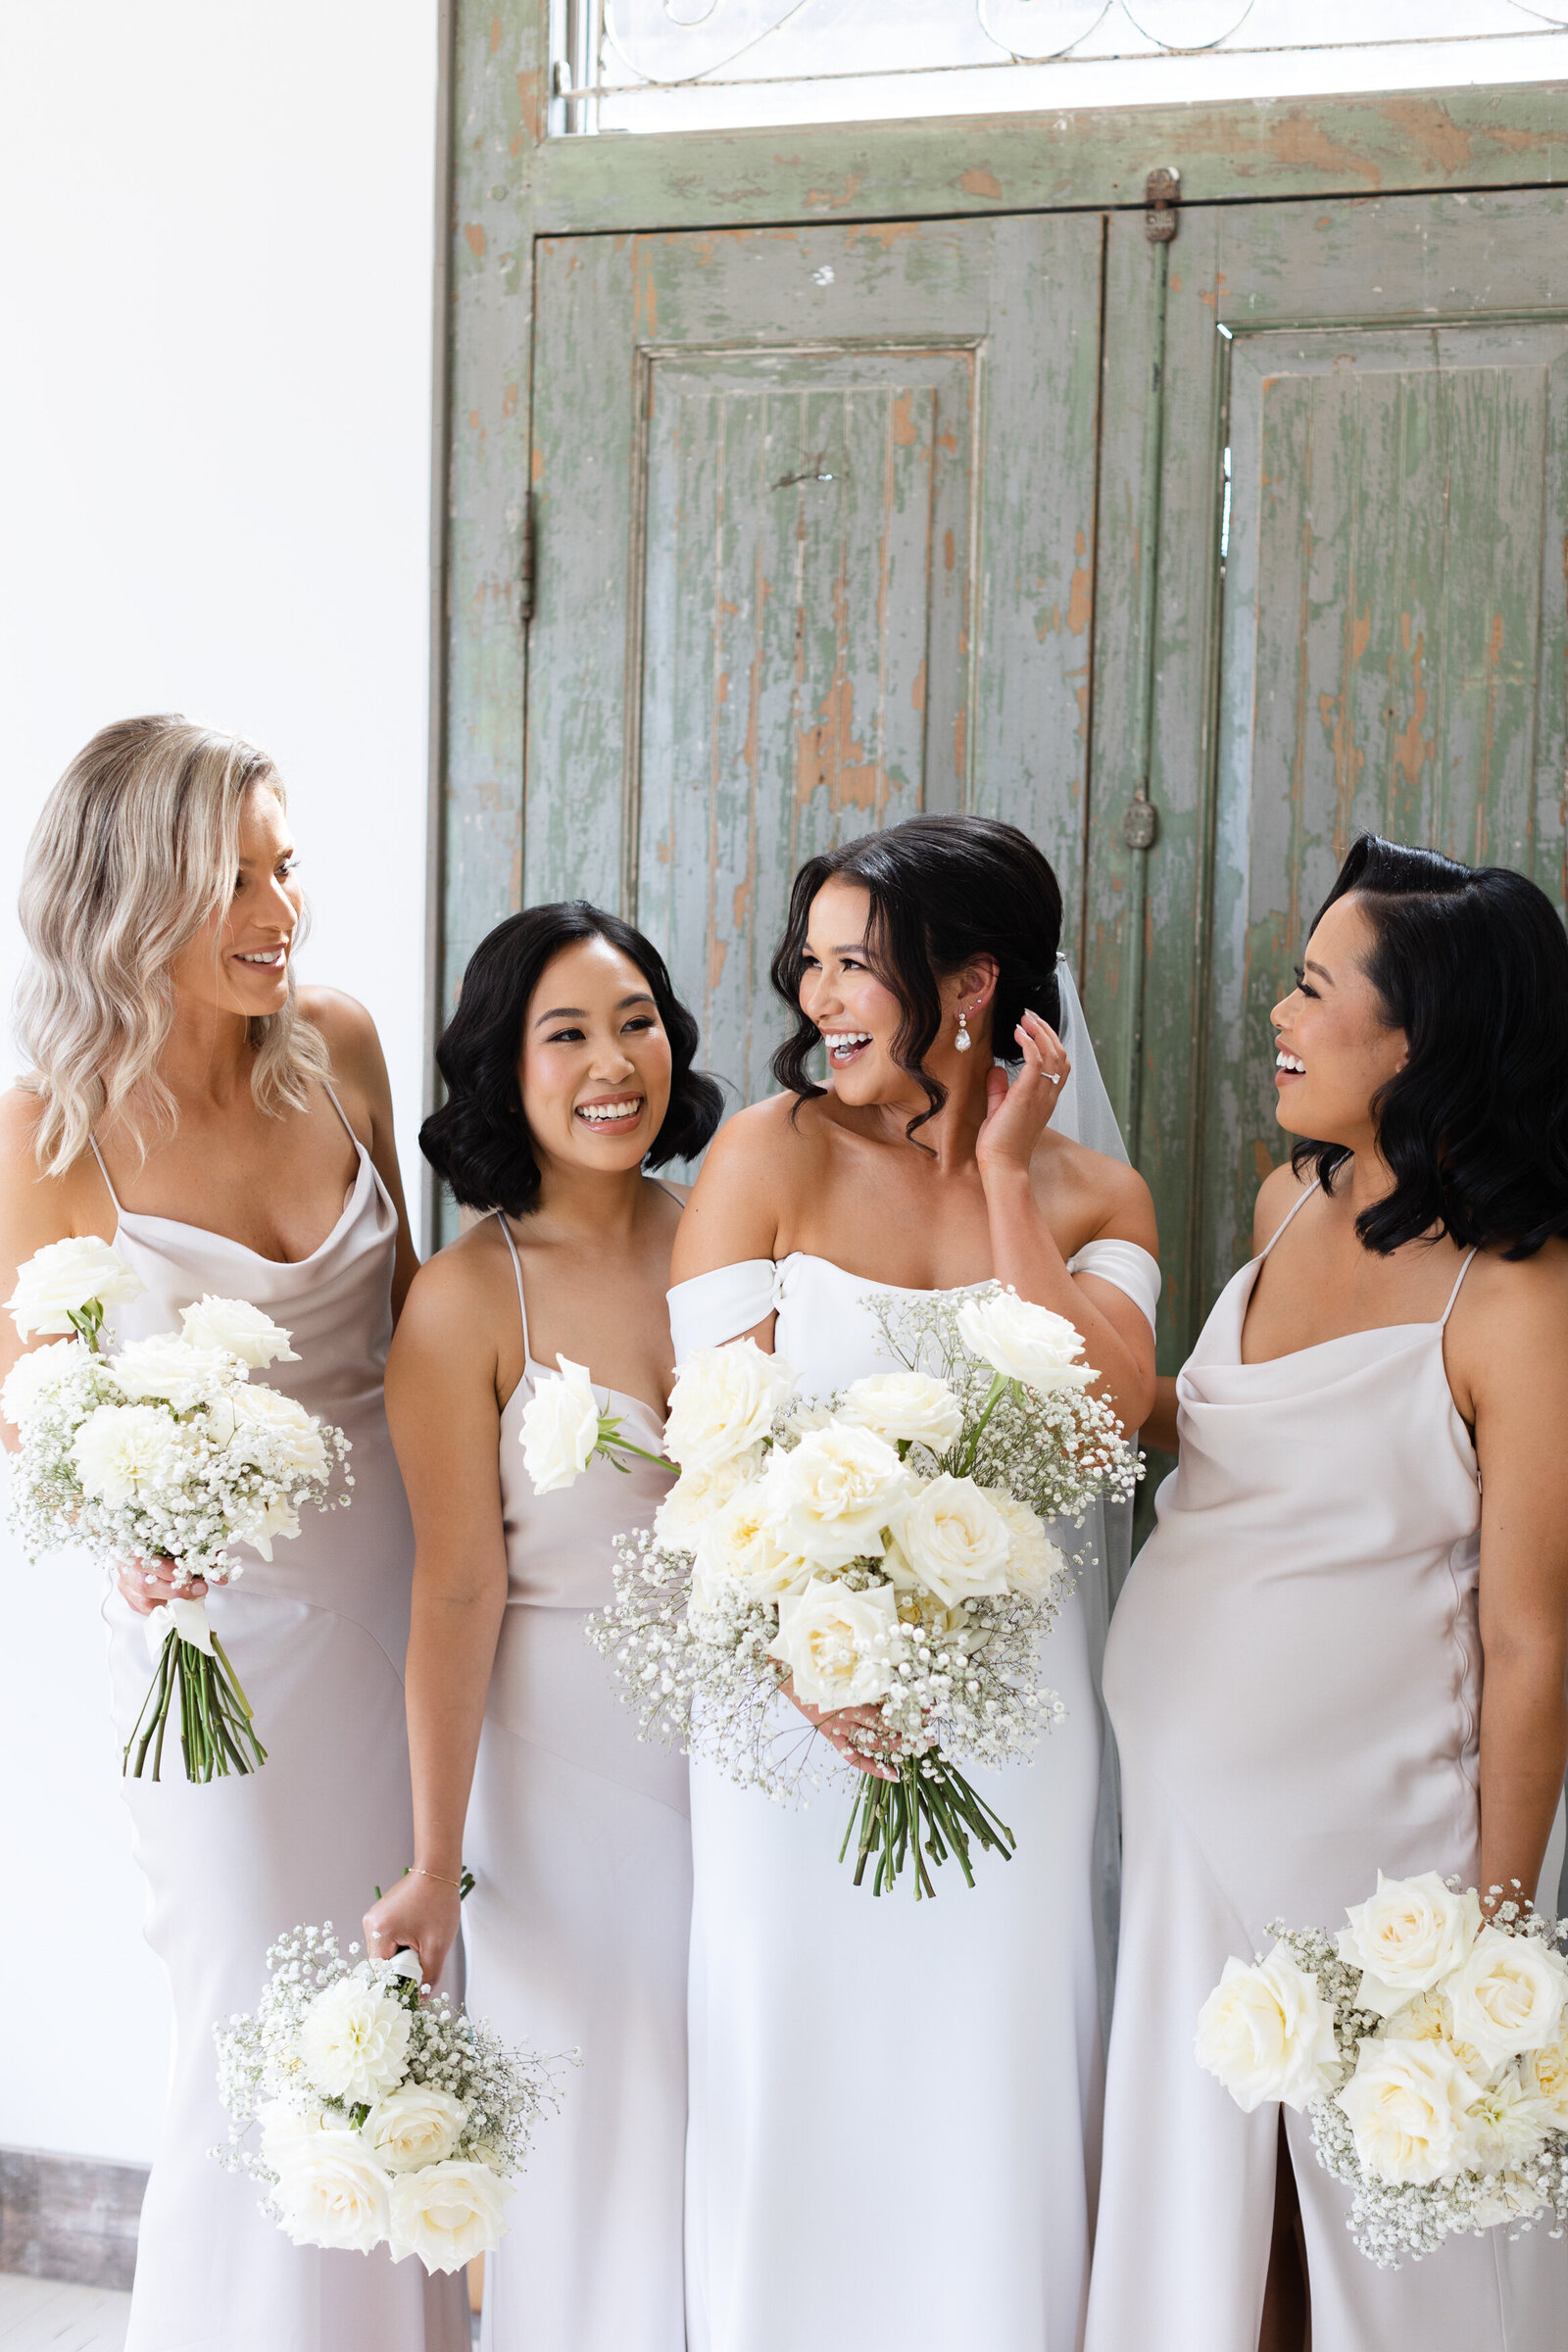 Bridal party captured at Syones of the Yarra Valley, Melbourne